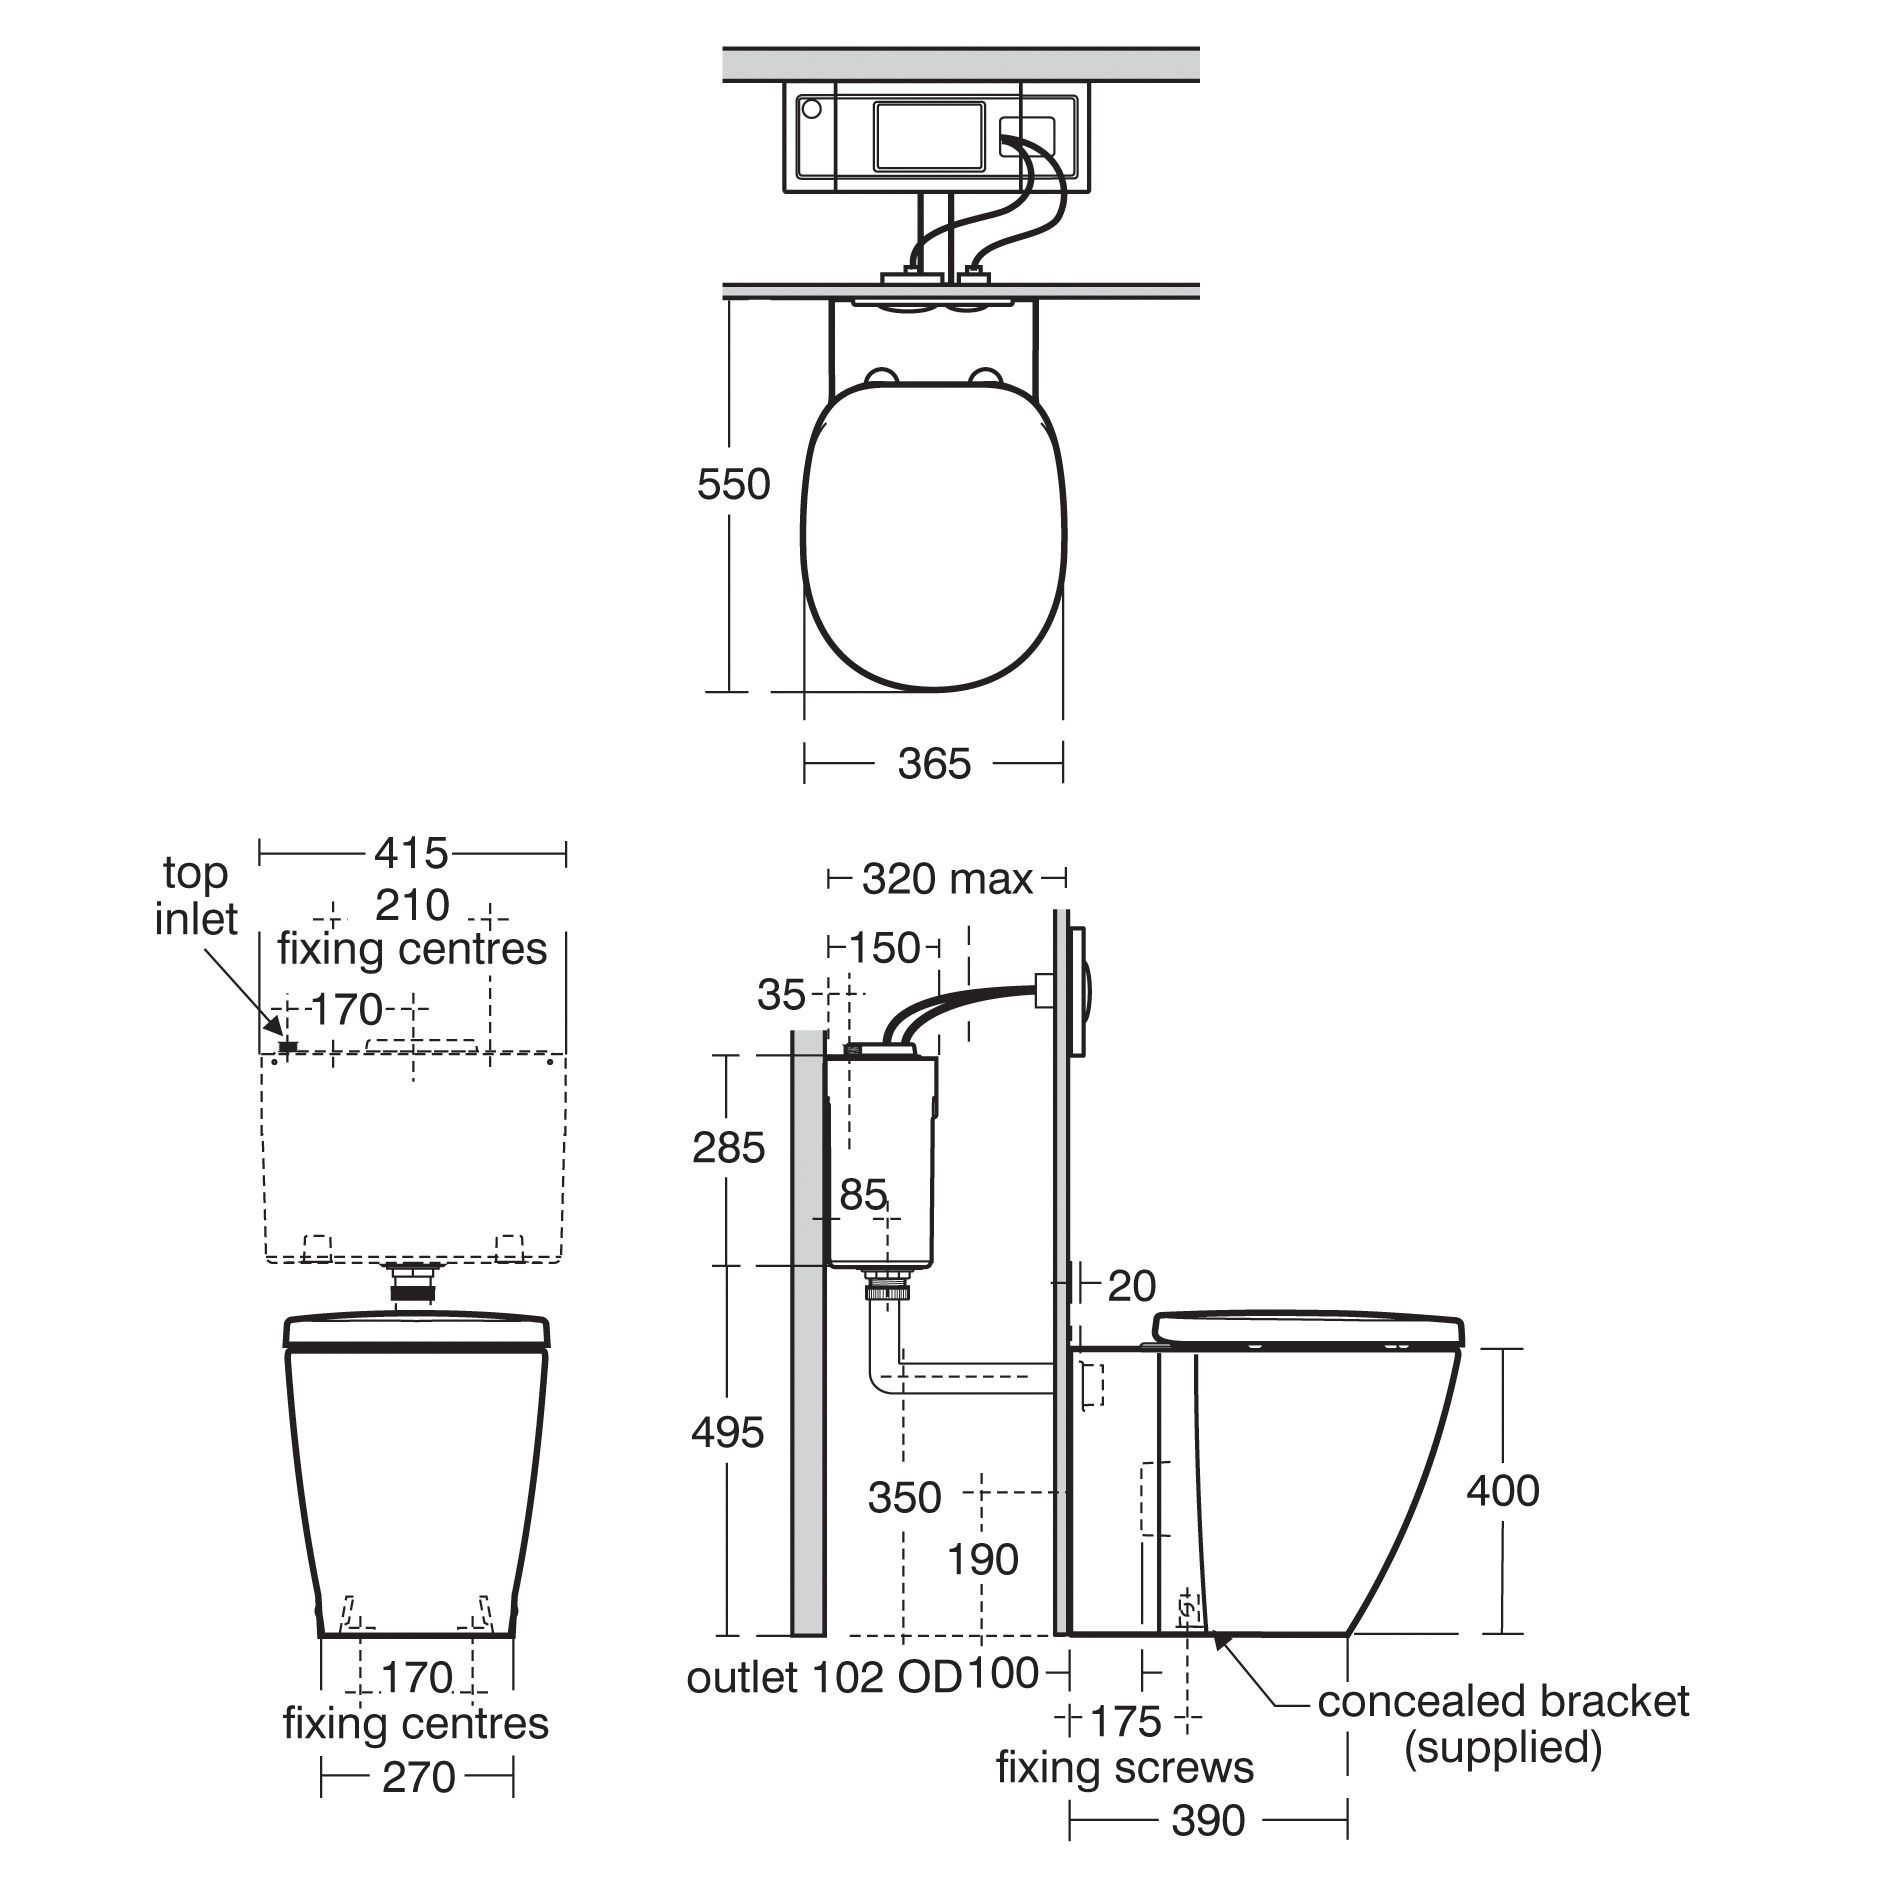 Ideal Standard Imagine aquablade Back to wall Toilet with Soft close seat